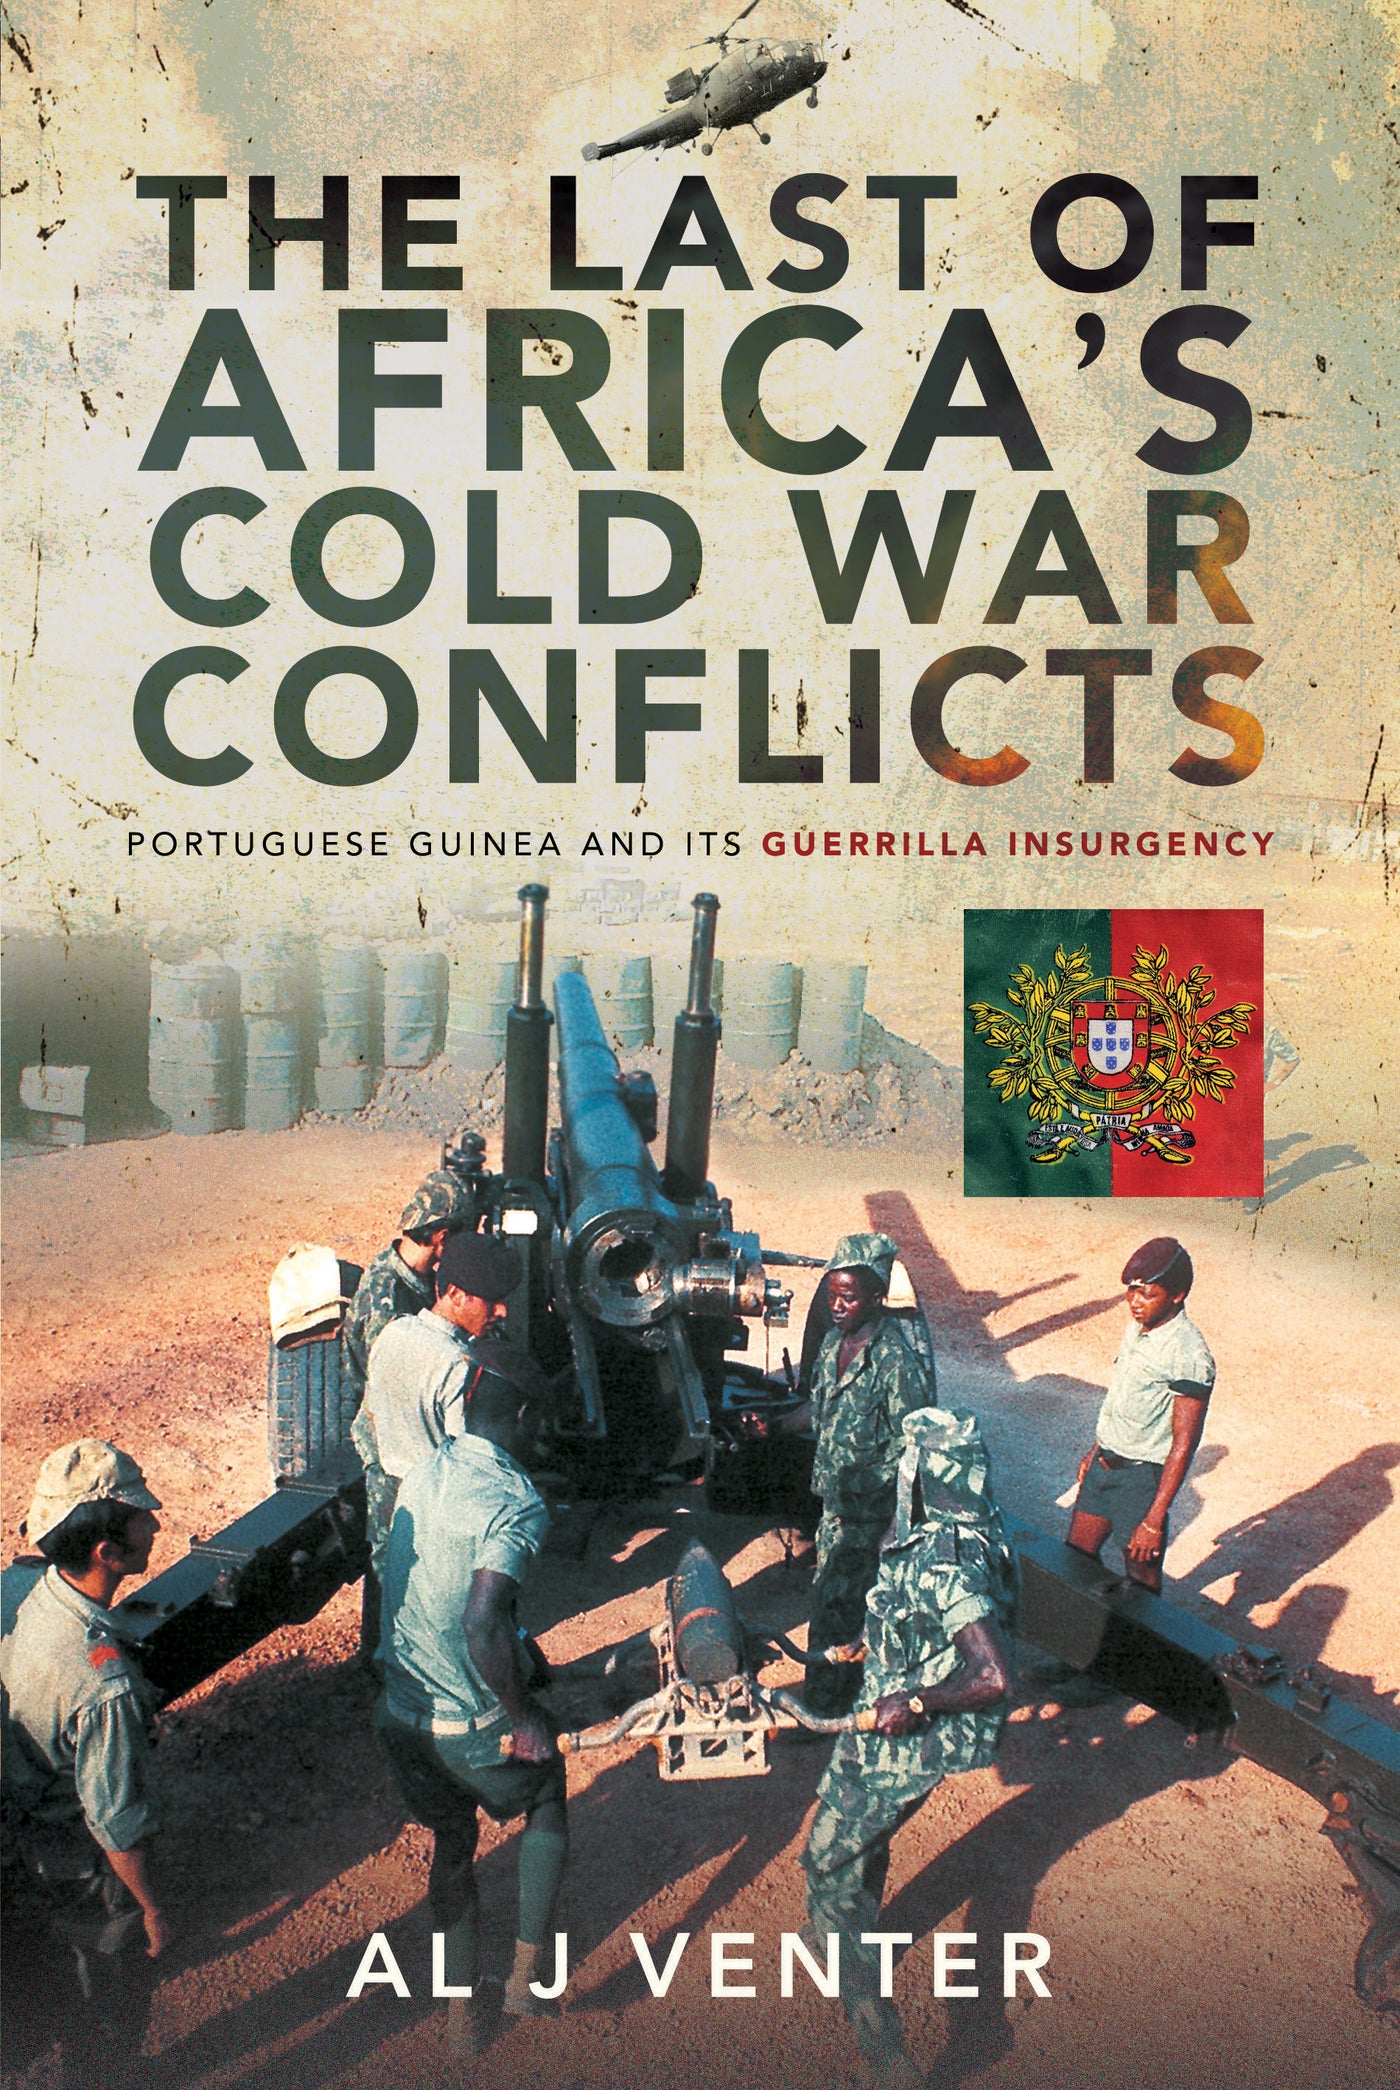 The Last of Africa's Cold War Conflicts